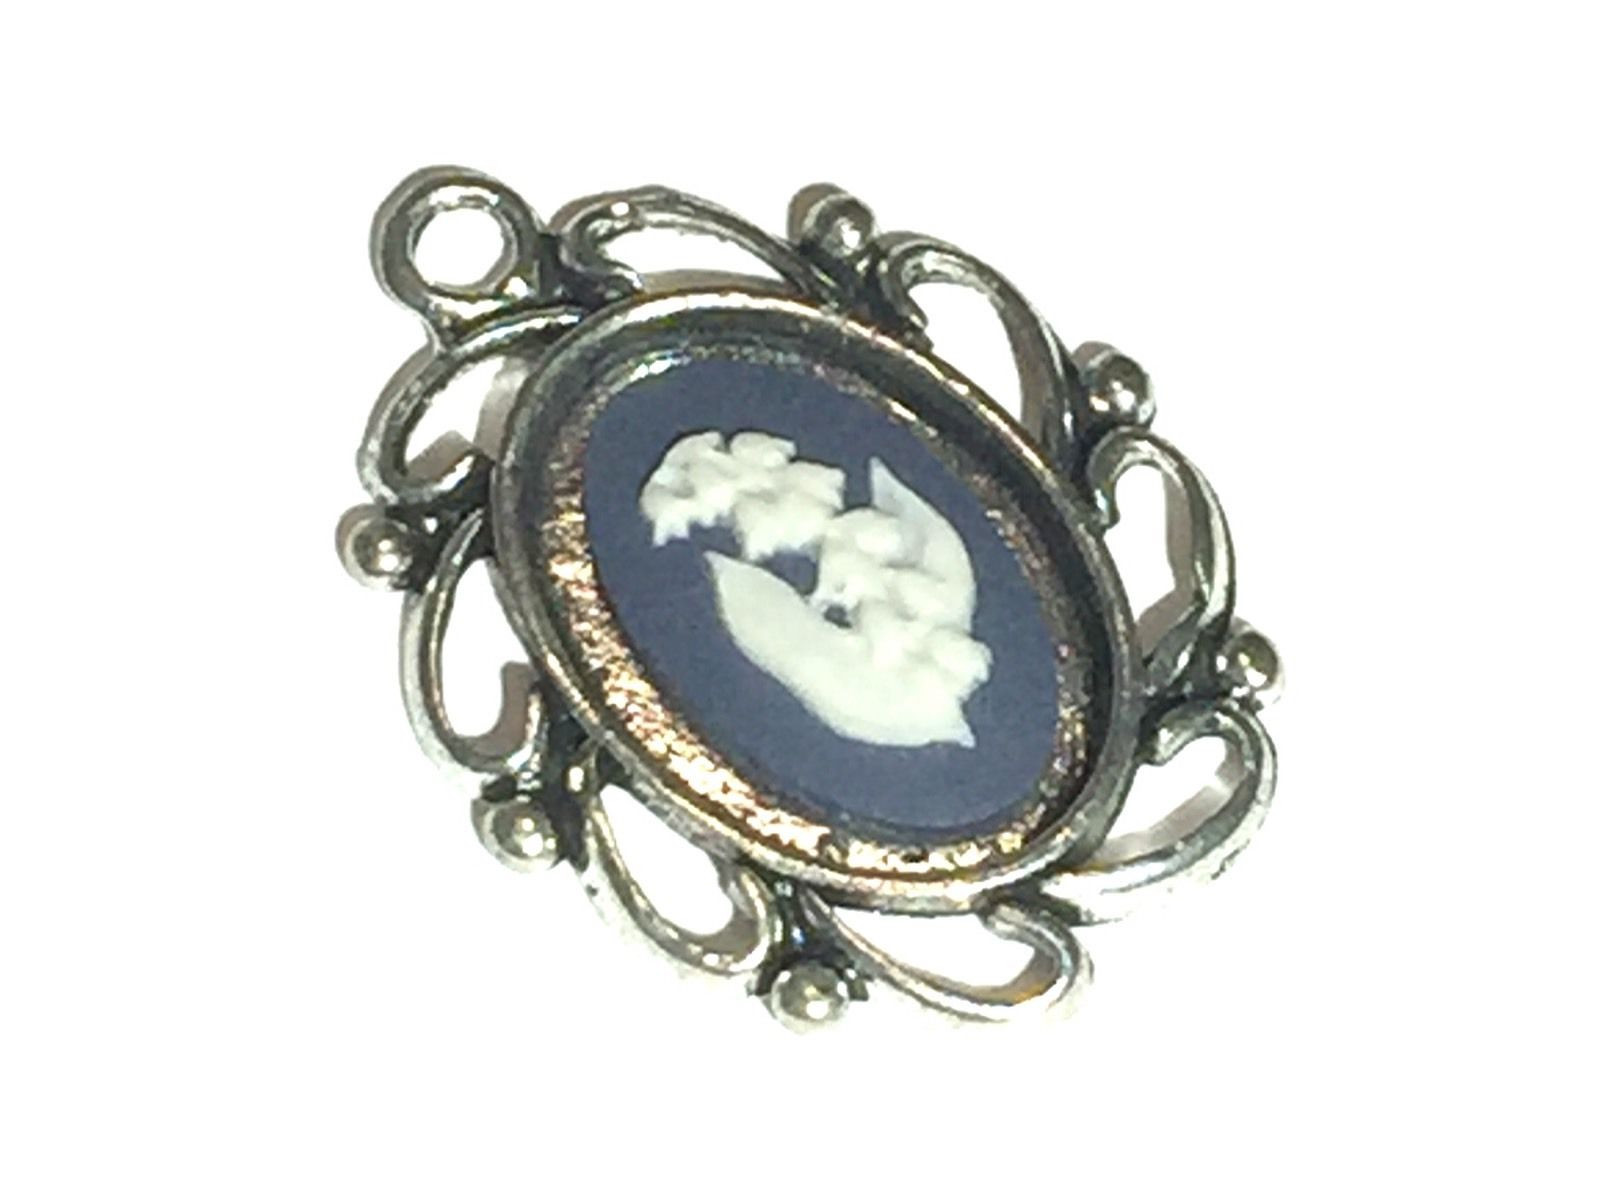 29 Lovable Wedgwood Jasper Vase 2024 free download wedgwood jasper vase of authentic wedgwood jasperware cameo in silver plated pendant with authentic wedgwood jasperware cameo in silver plated pendant